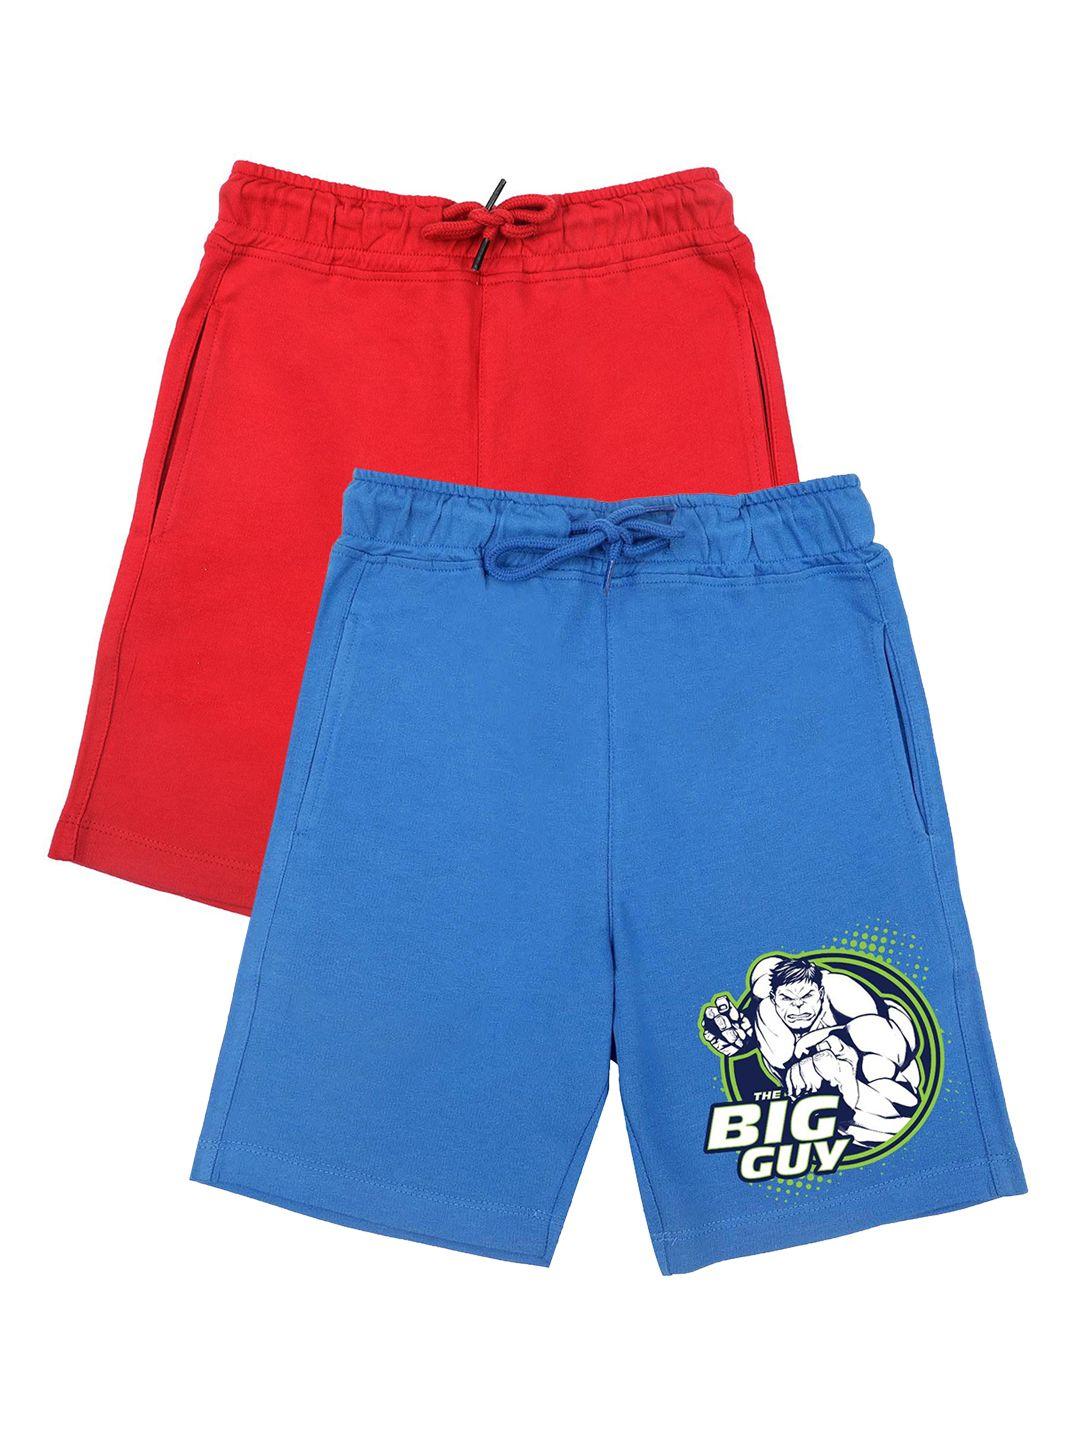 disney by wear your mind boys set of 2 blue & red printed mickey mouse shorts